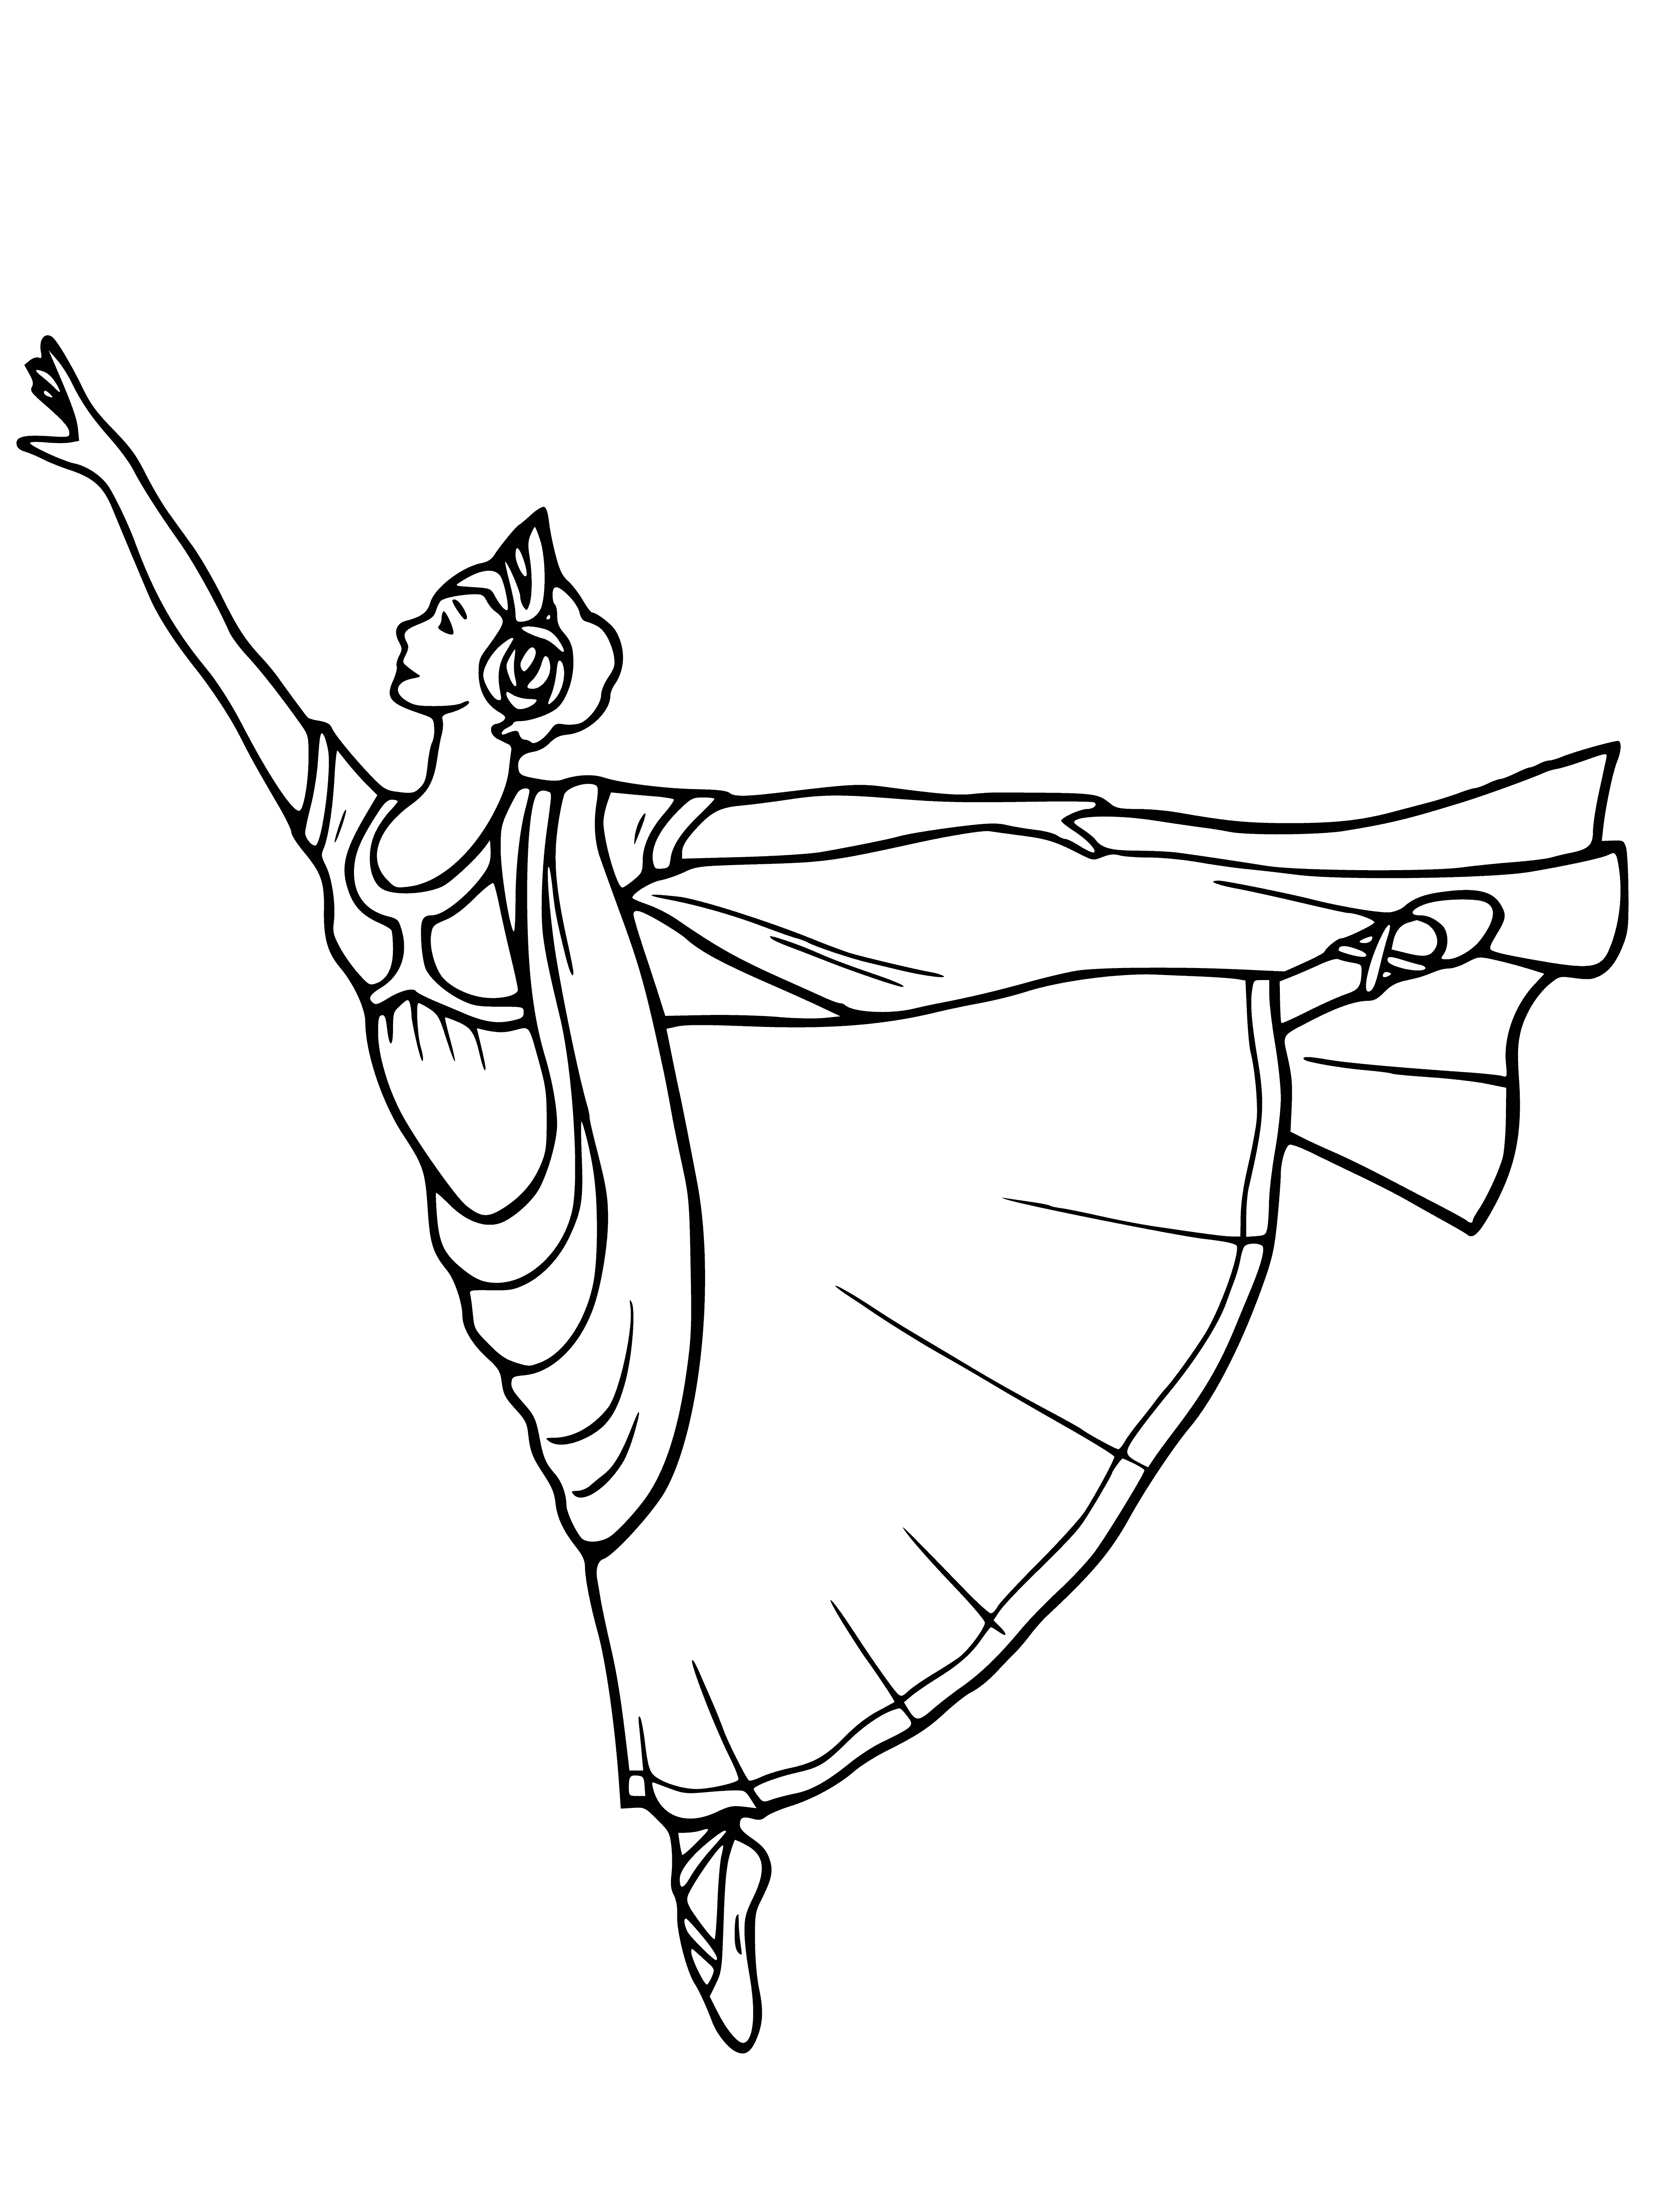 coloring page: Dancers in white tutus point toes in perfect formation, arms raised, hair pulled back, gracefully performing on stage. #ballet #elegance